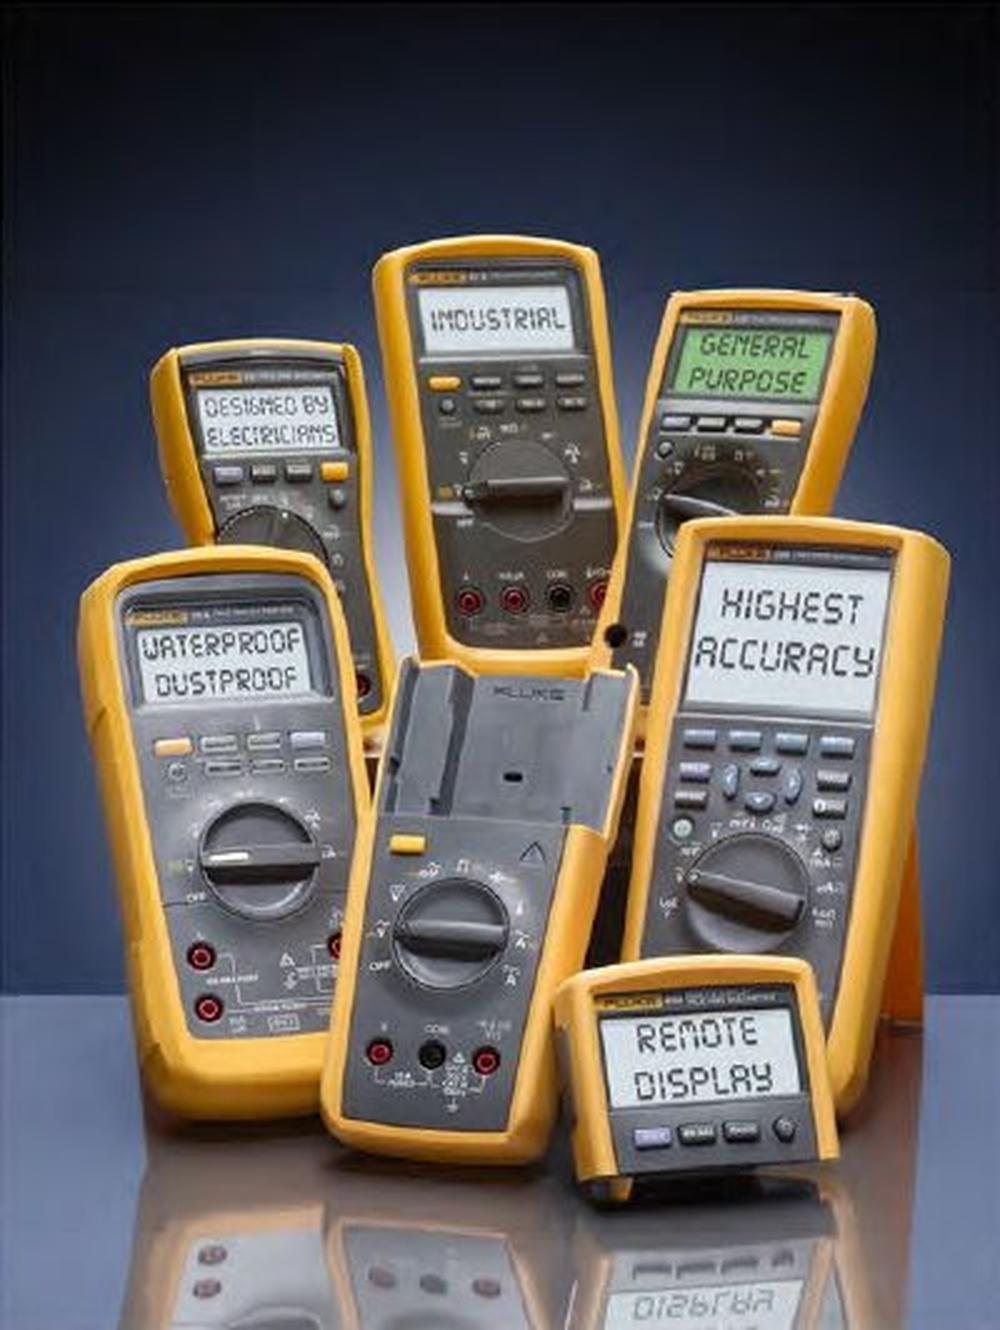 Multimeter with wireless display